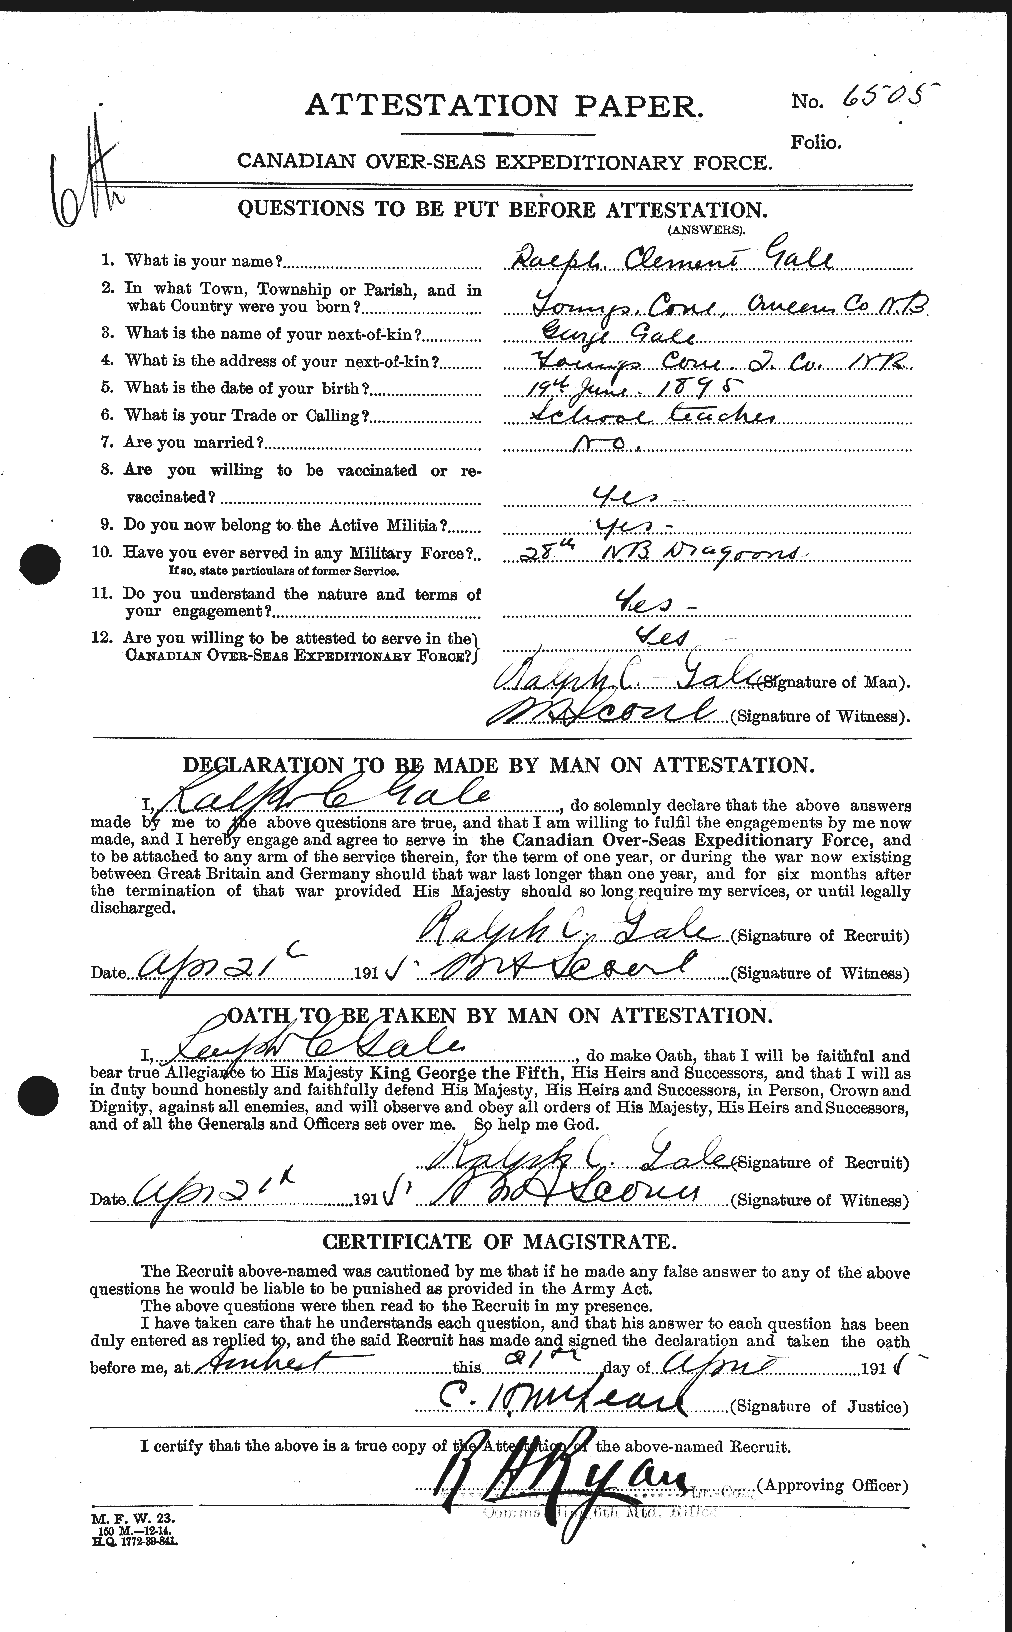 Personnel Records of the First World War - CEF 345405a